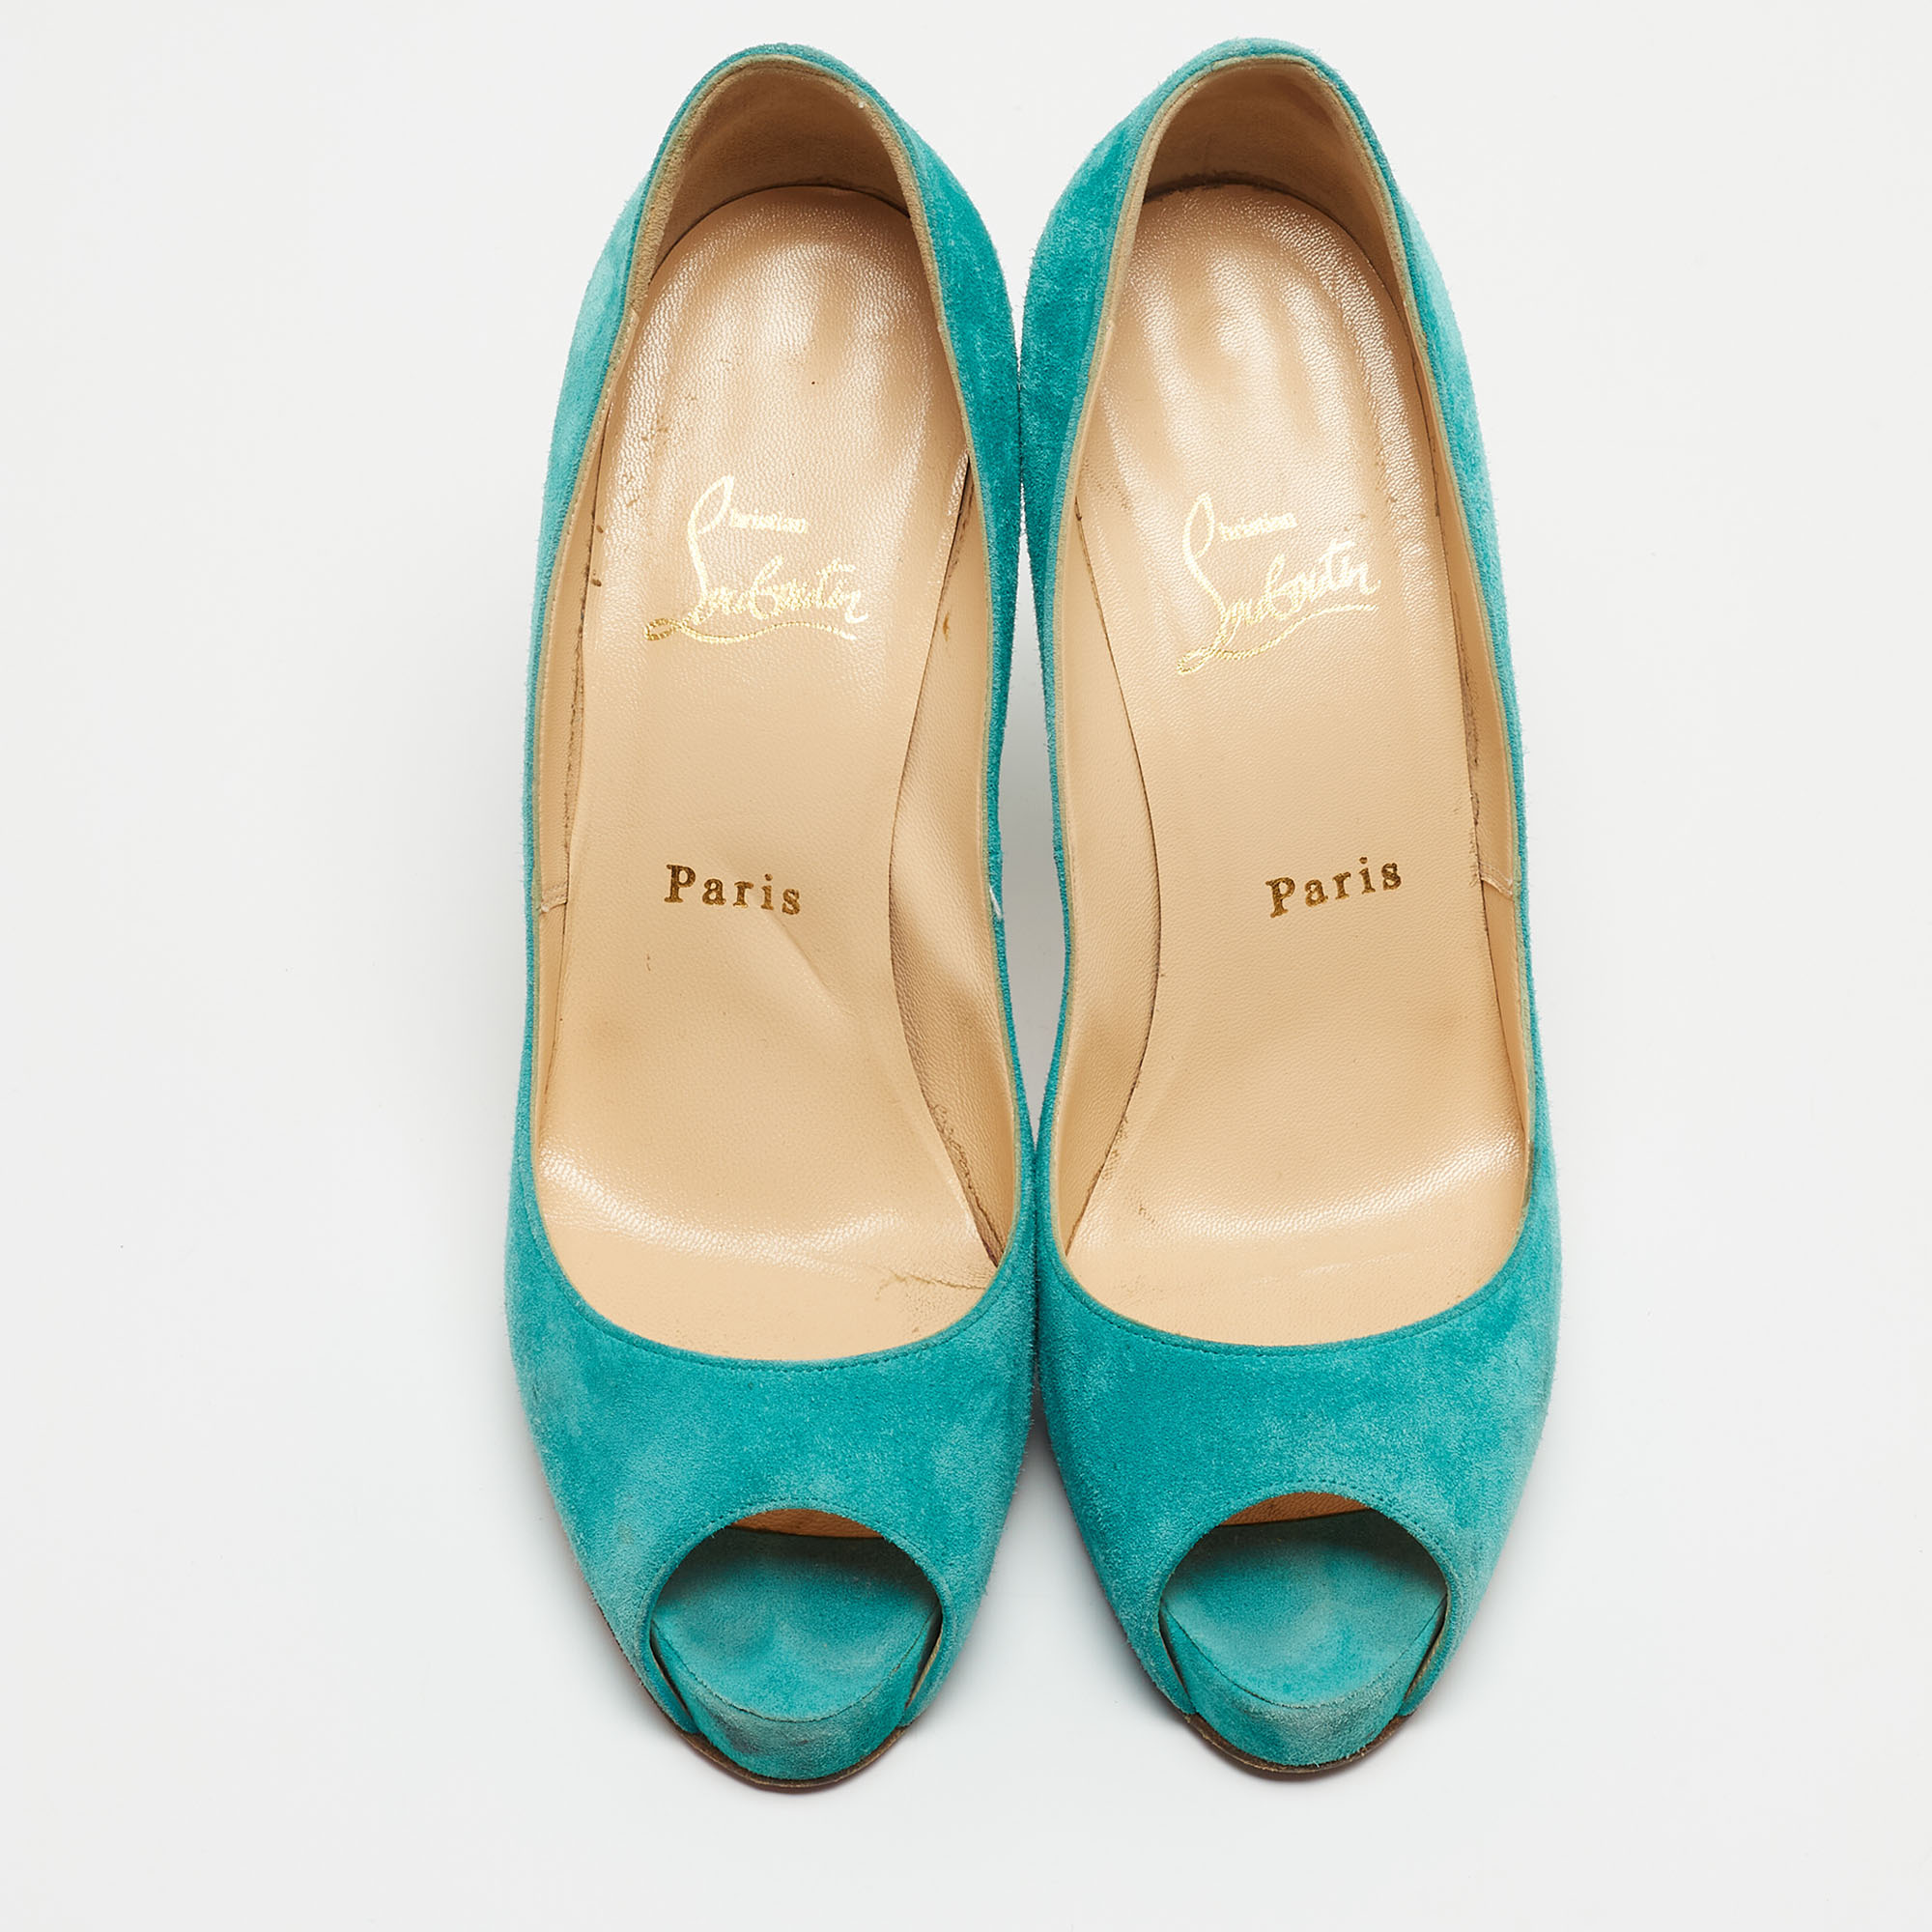 Christian Louboutin Turquoise Suede Very Prive Pumps Size 38.5